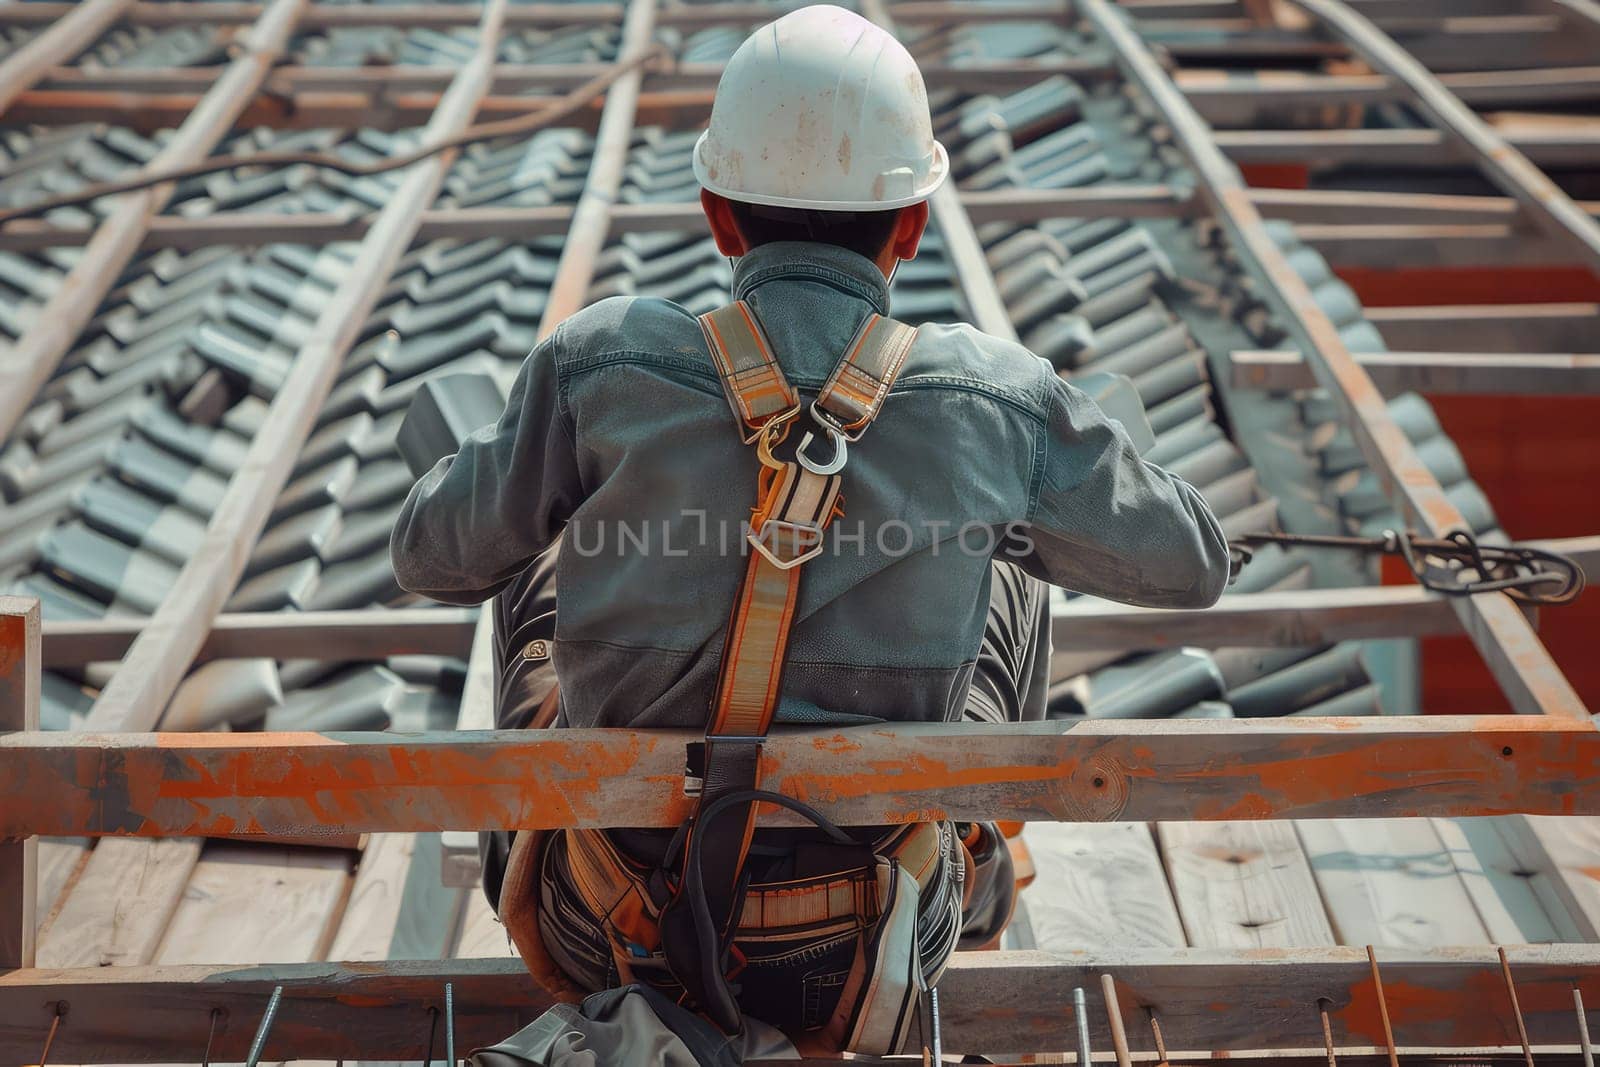 Construction Worker in Safety Gear Installing Roof Tiles with Precision and Care. by Dvorak